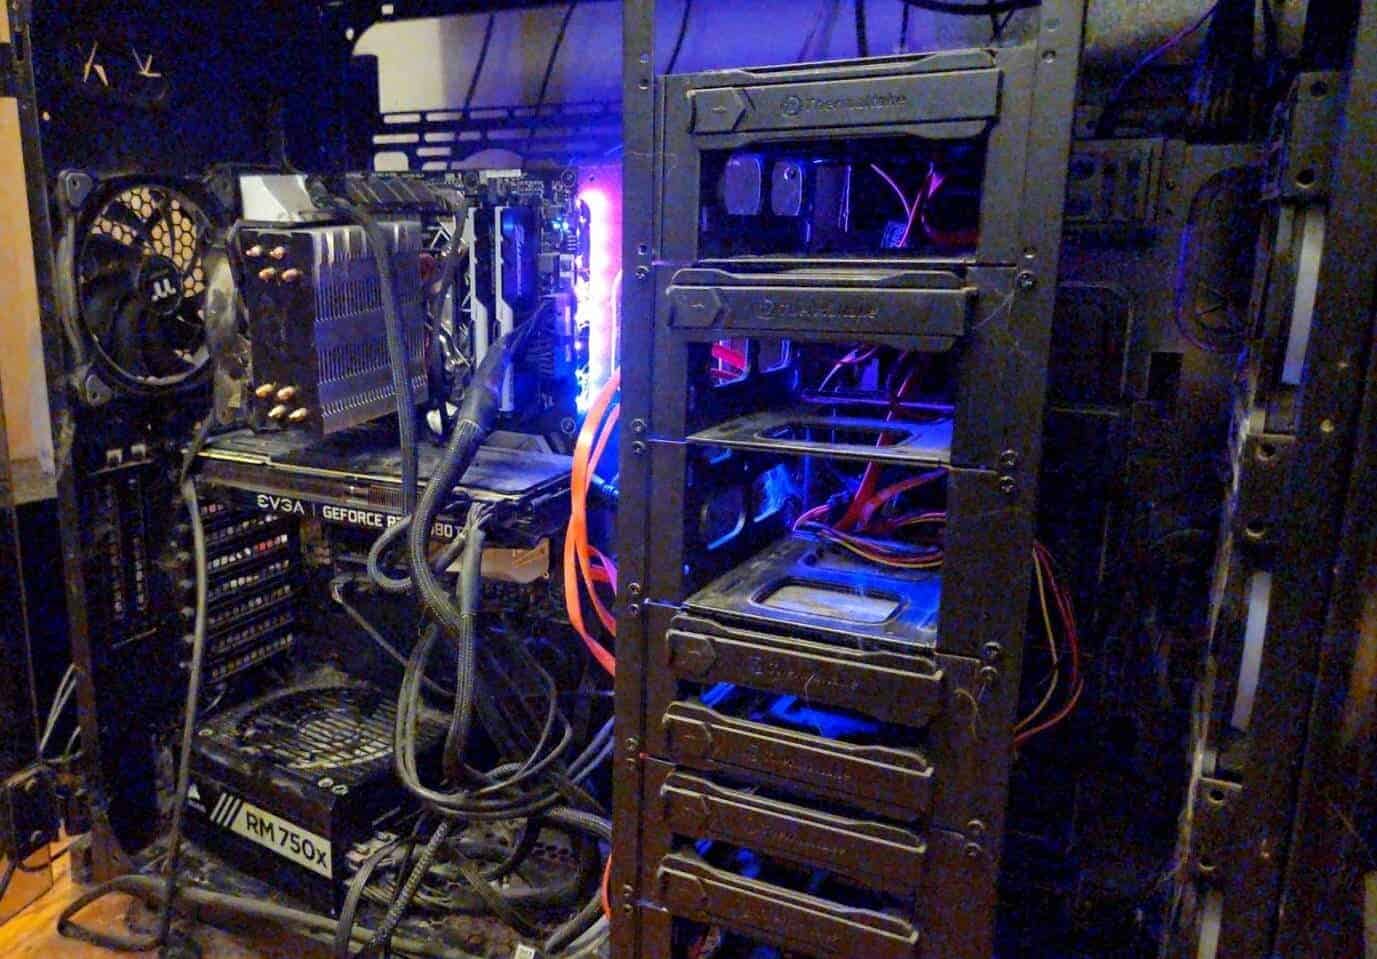 A close up of a full-tower gaming PC.